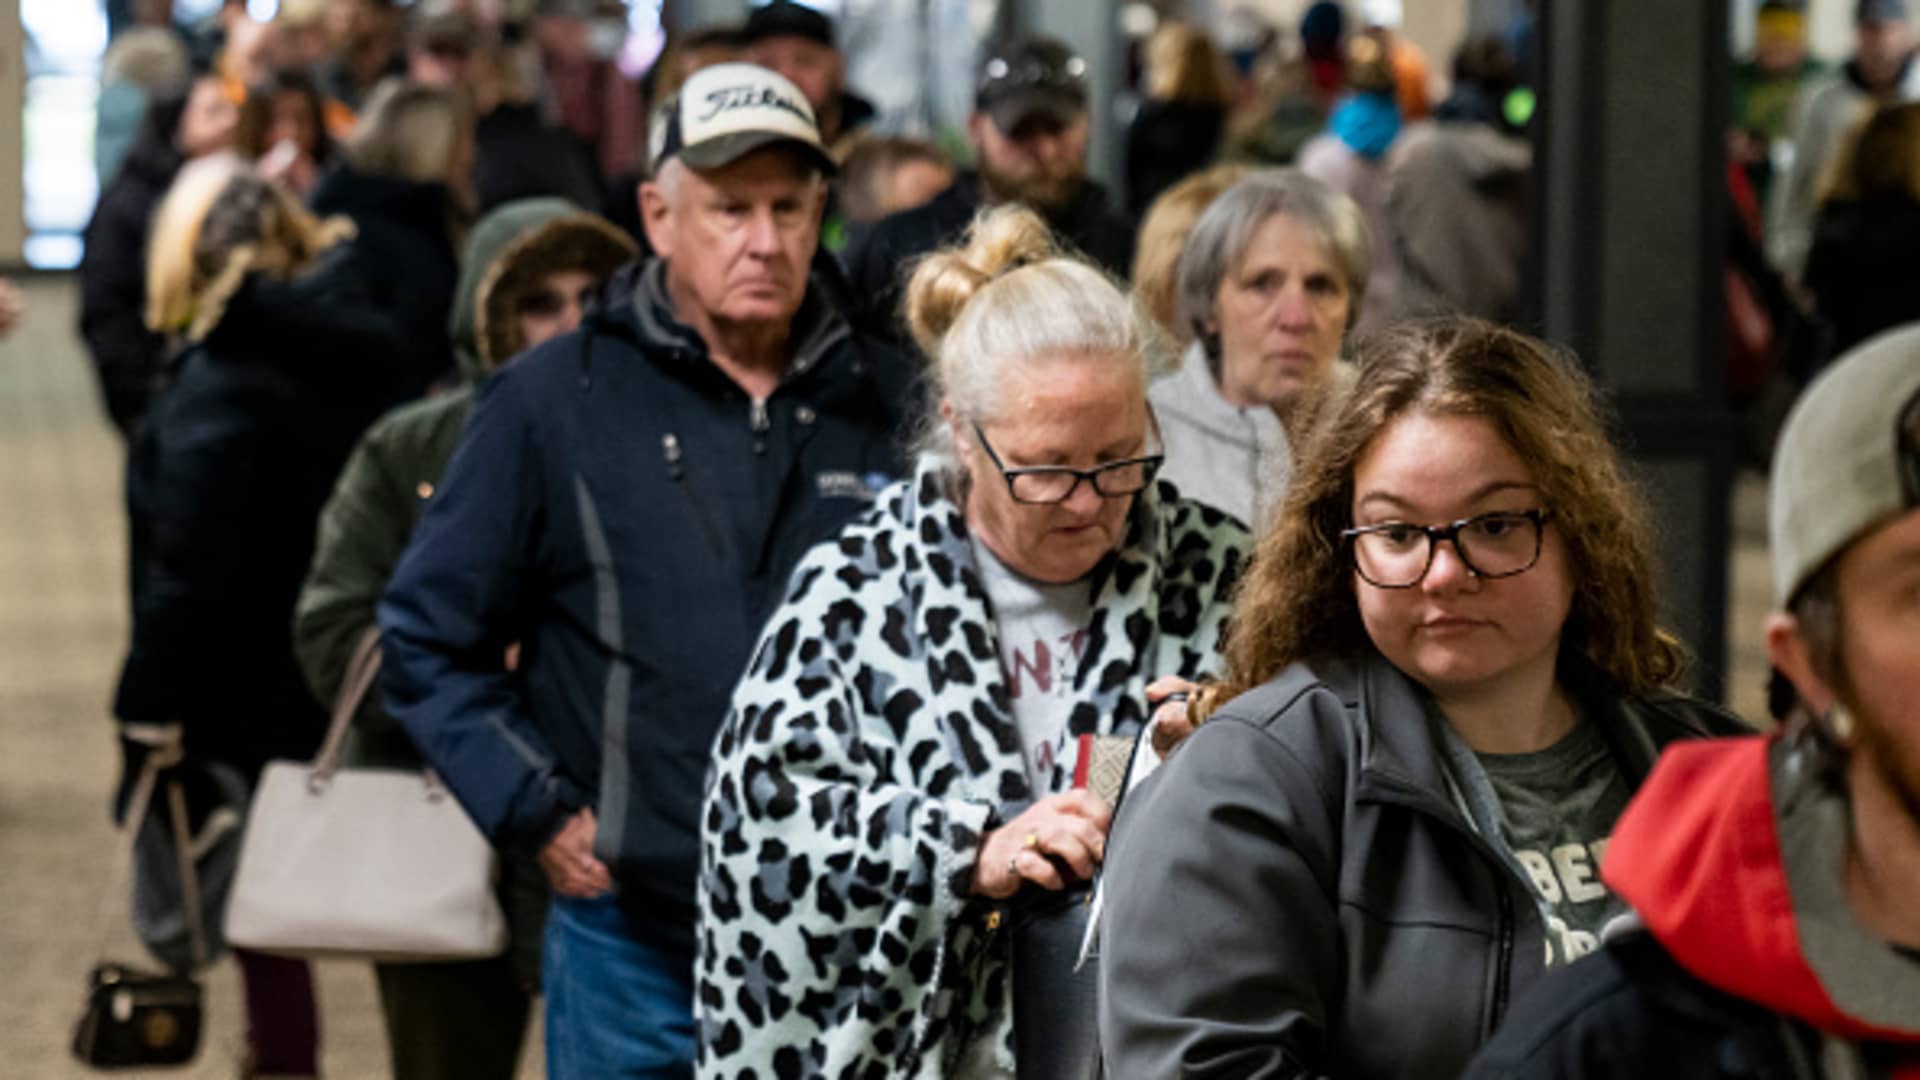 People wait in line at the Norfolk Southern Assistance Center to collect a $1000 check and get reimbursed for expenses while they were evacuated following a train derailment prompting health concerns on February 17, 2023 in East Palenstine, Ohio.